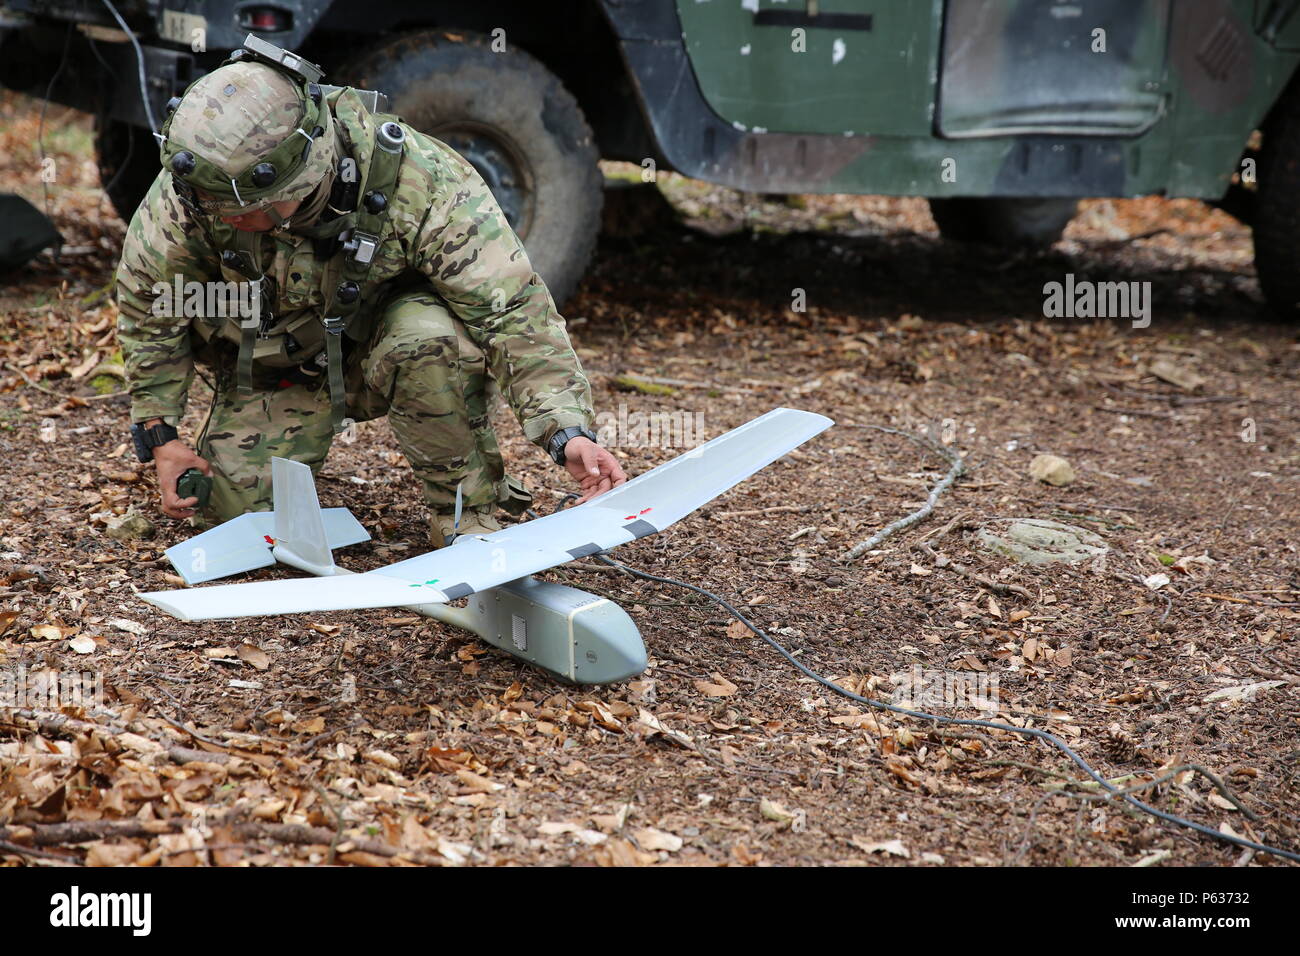 A U.S. Soldier of Bulldog Troop, 1st Squadron, 91st Cavalry Regiment, 173rd Airborne Brigade prepares a RQ-11 Raven unmanned aerial vehicle while conducting an aerial reconnaissance training mission during exercise Saber Junction 16 at the U.S. Army’s Joint Multinational Readiness Center (JMRC) in Hohenfels, Germany, April 13, 2016. Saber Junction 16 is the U.S. Army Europe’s 173rd Airborne Brigade’s combat training center certification exercise, taking place at the JMRC in Hohenfels, Germany, Mar. 31-Apr. 24, 2016.  The exercise is designed to evaluate the readiness of the Army’s Europe-based Stock Photo